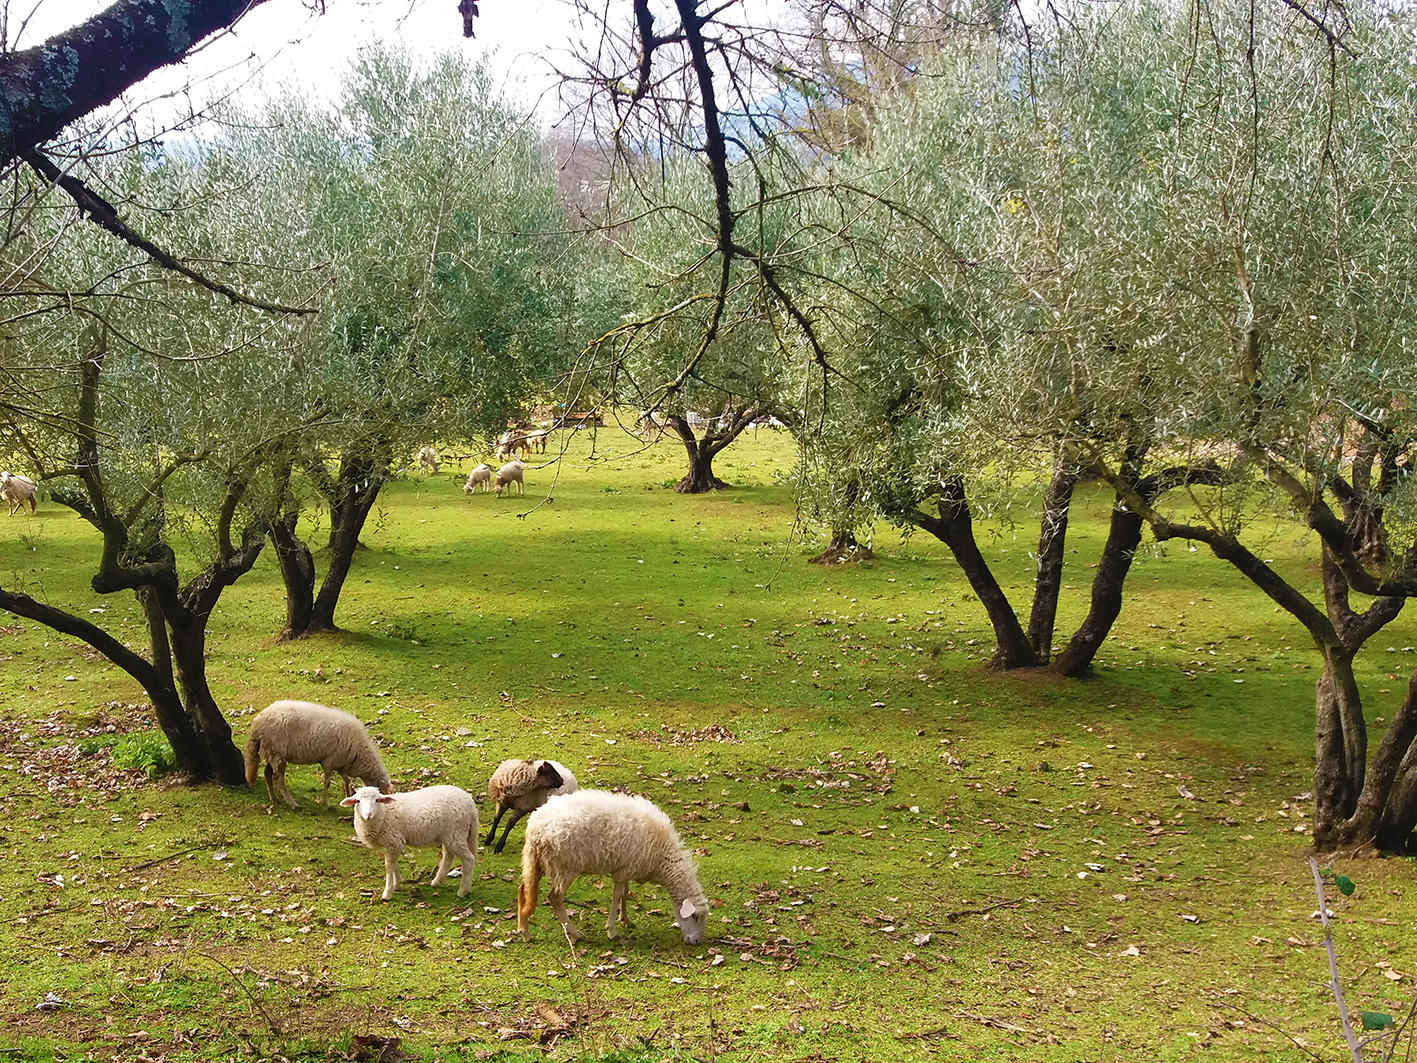 Paliano, the typical Mediterranean integration of olive farming and sheep breeding. Photo by the authors.